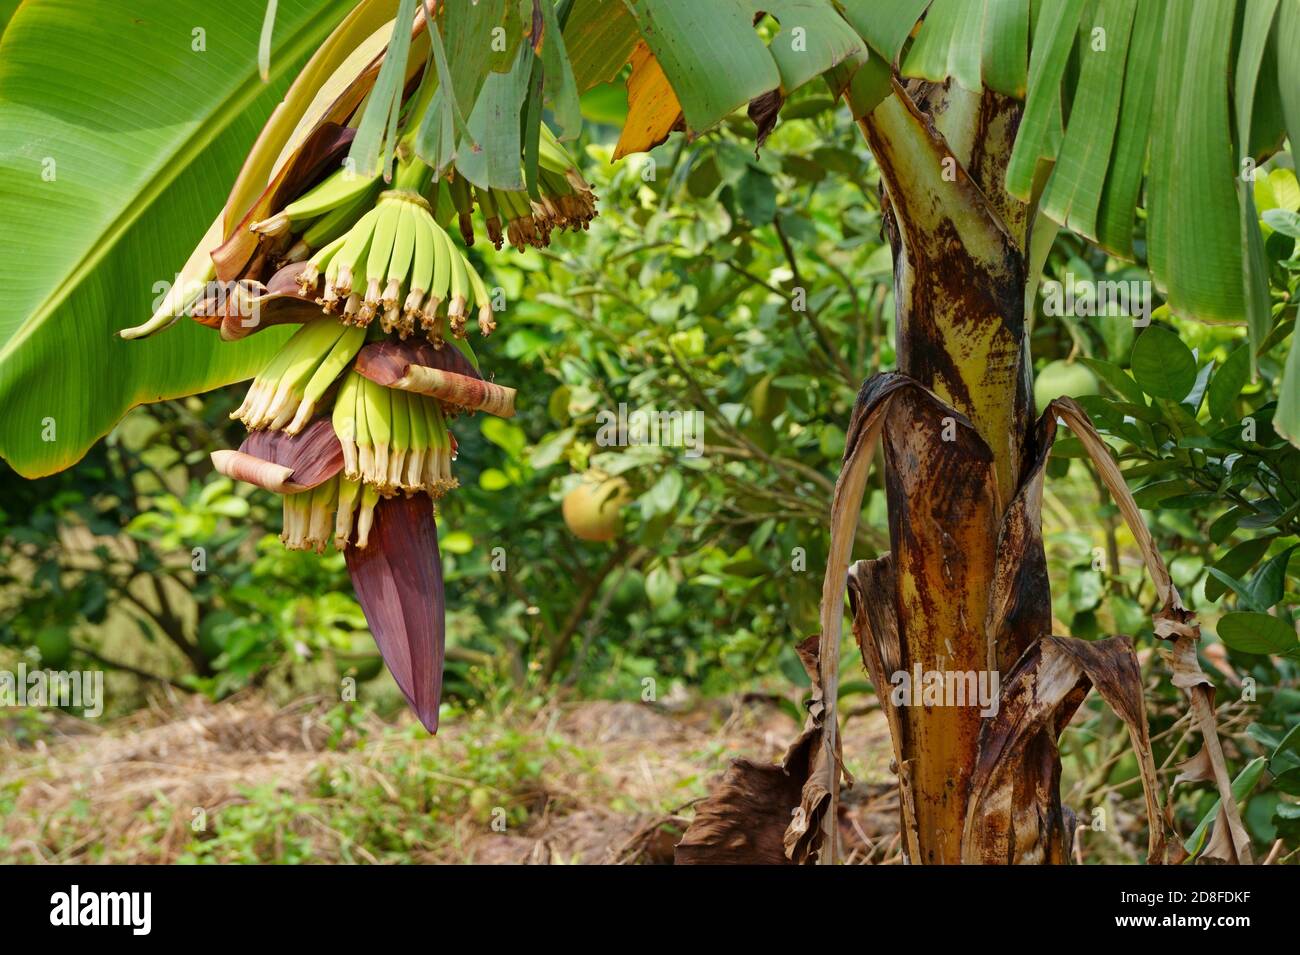 Close up of banana blossom on tree in the garden Stock Photo